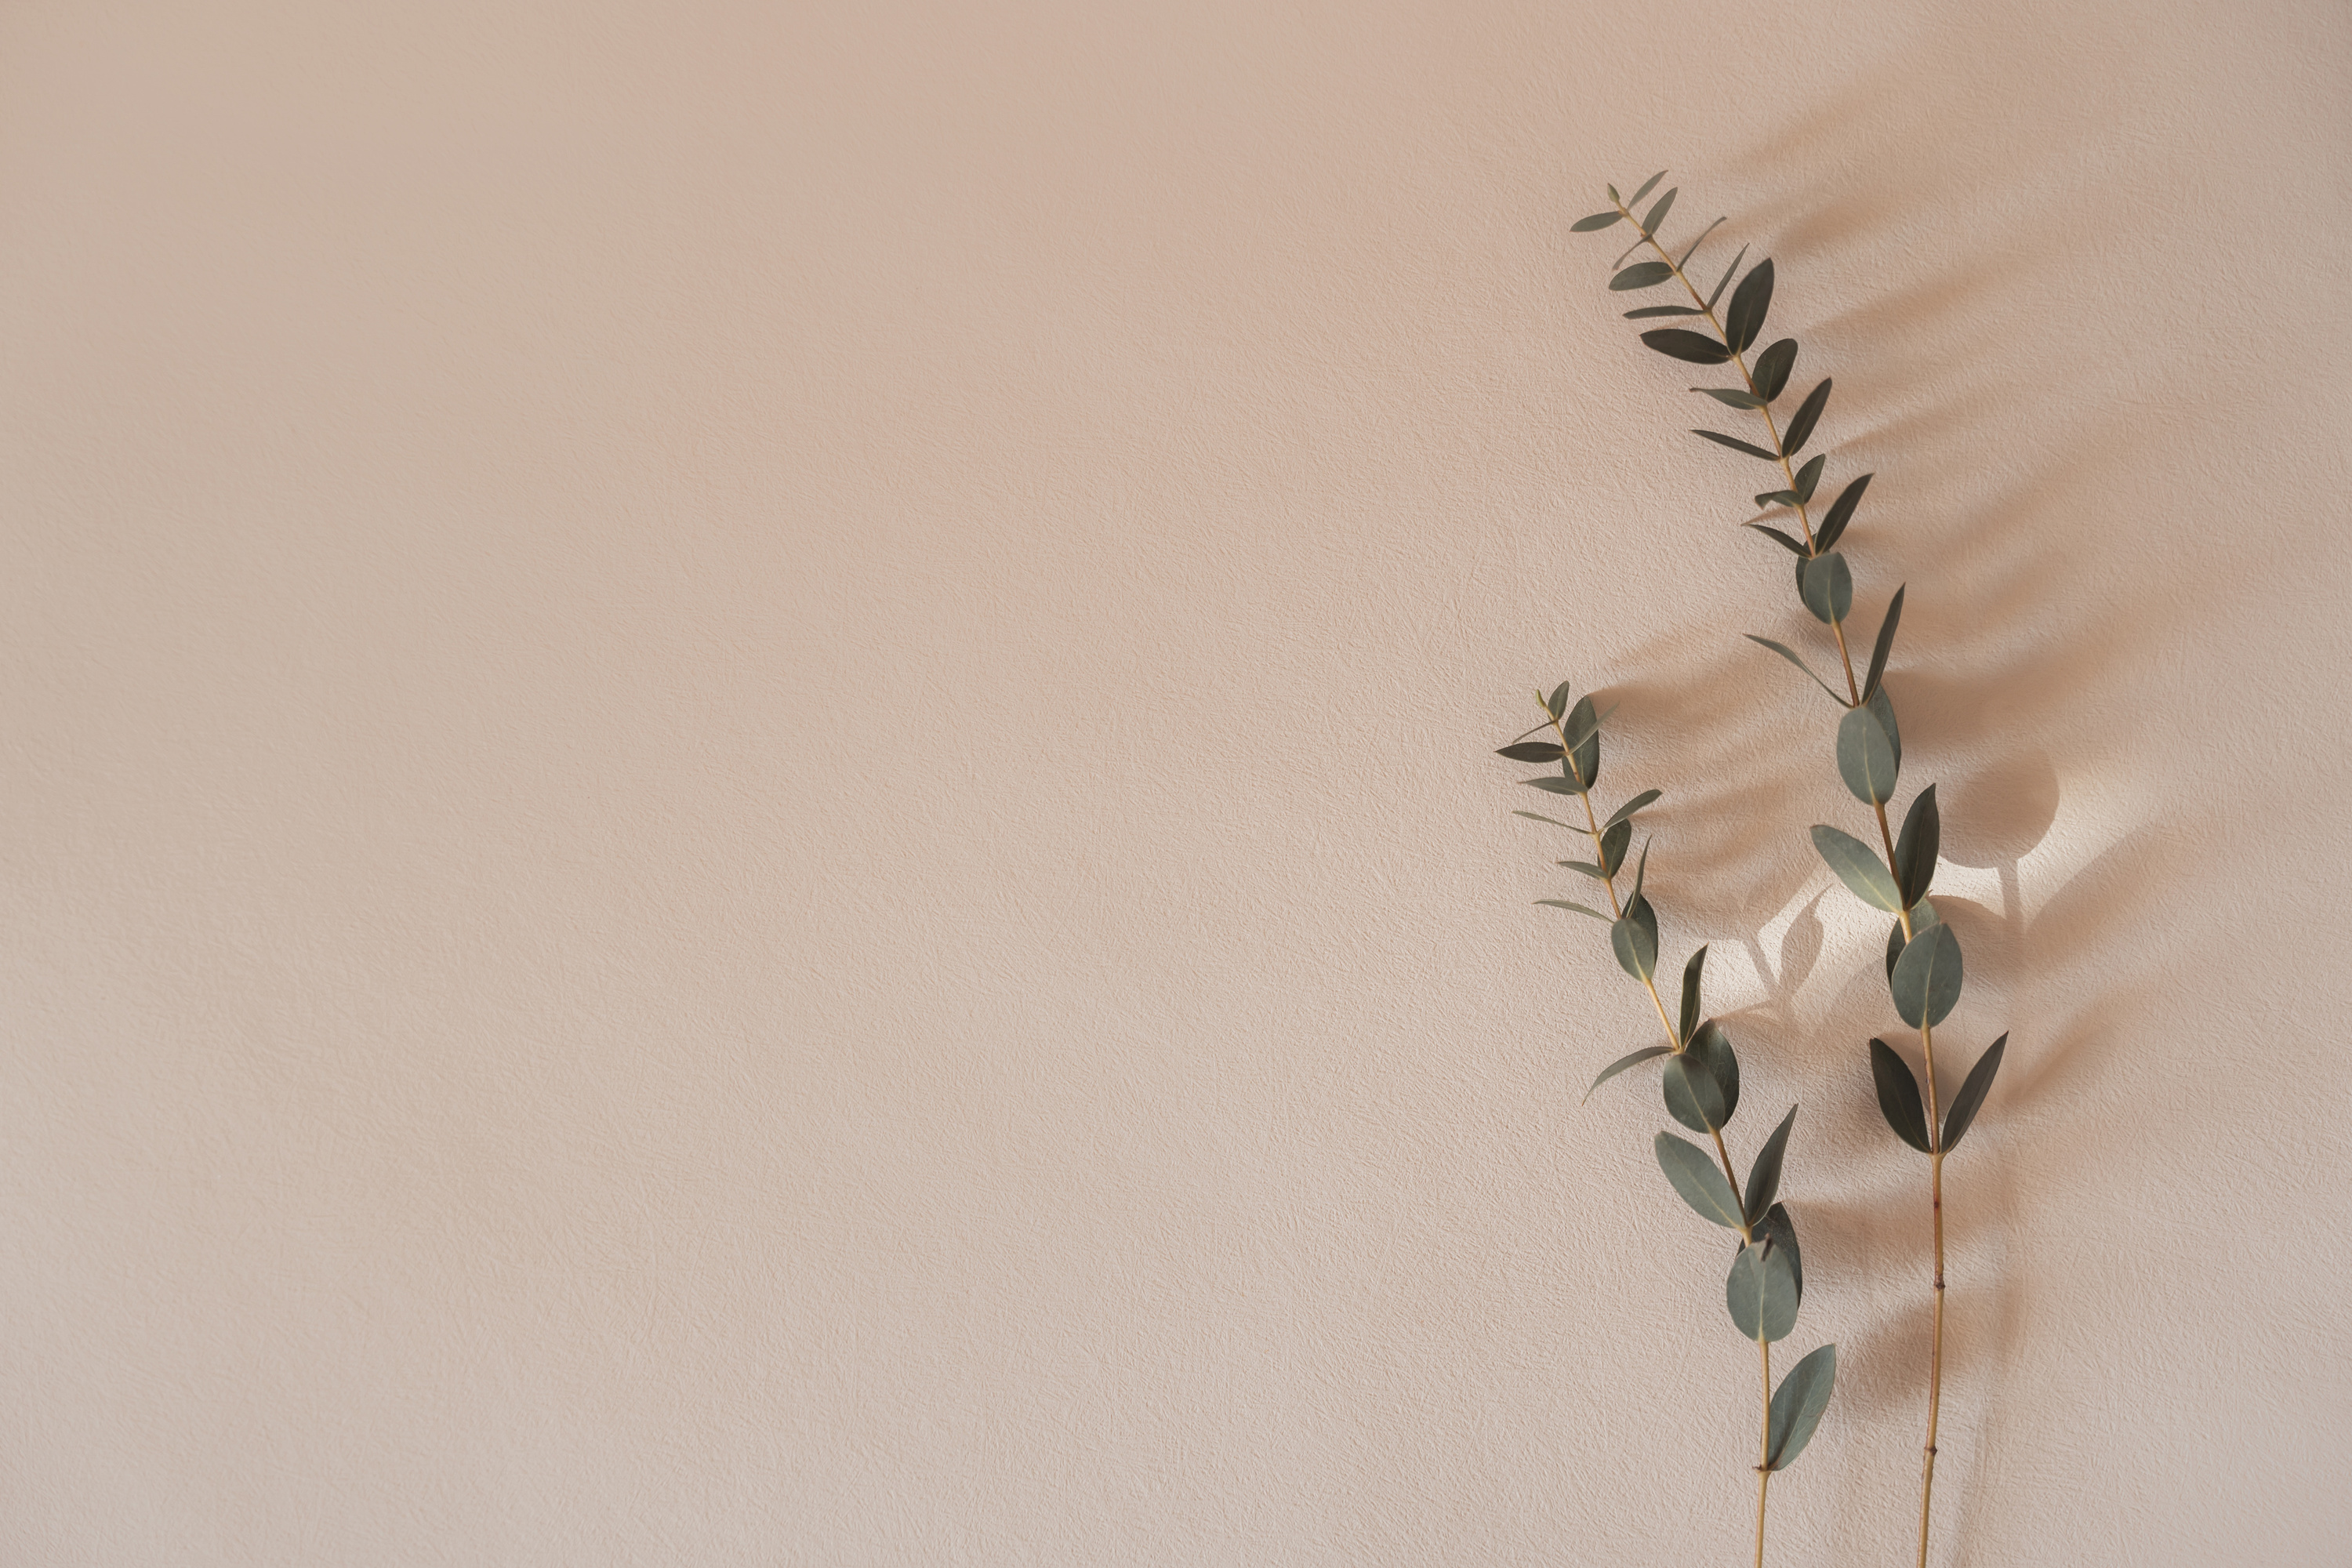 Soft pastel background with eucalyptus branches, minimalist aesthetic, copy space